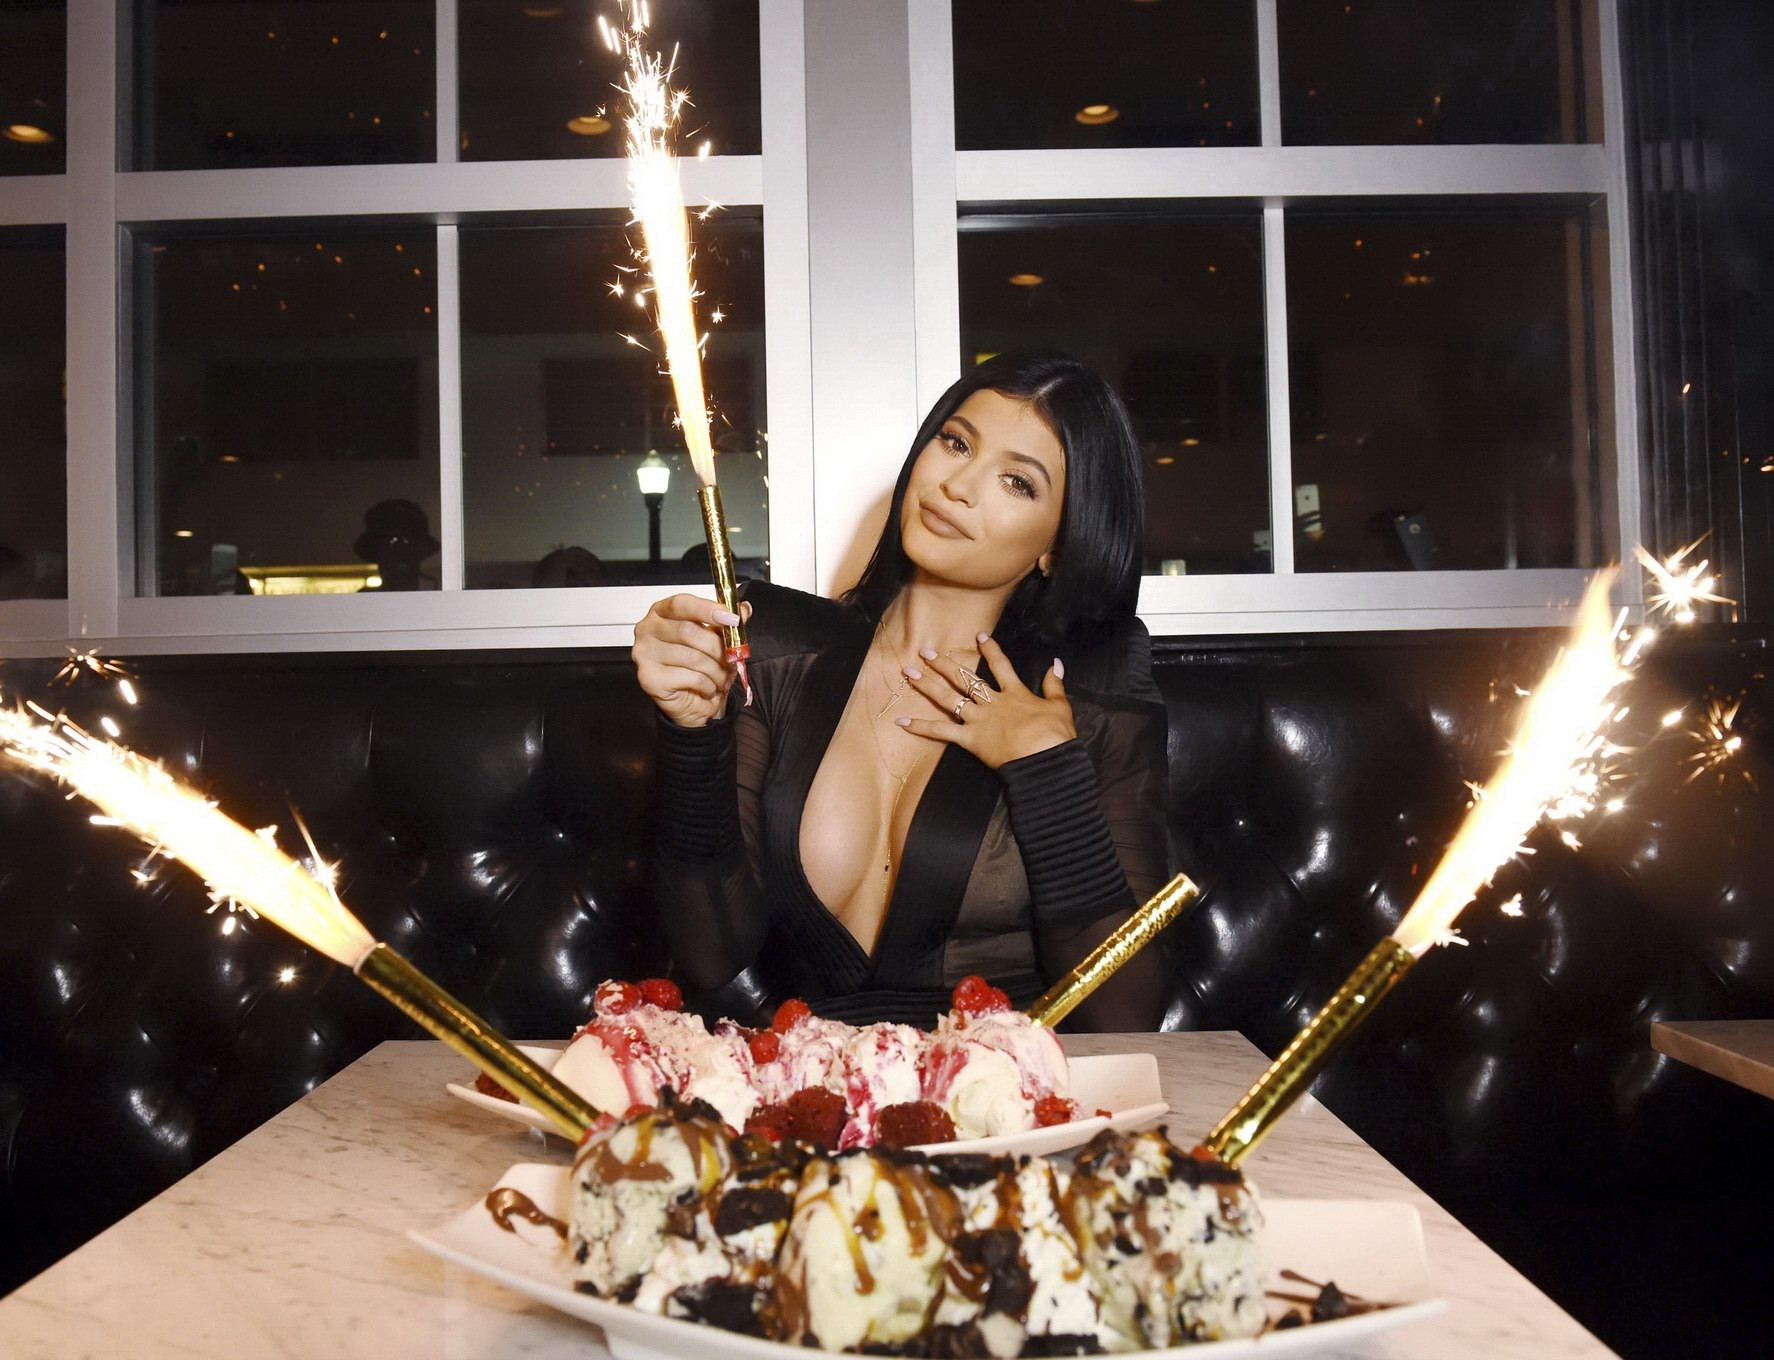 Kylie Jenner showing huge cleavage at the Sugar Factory Opening #75160652